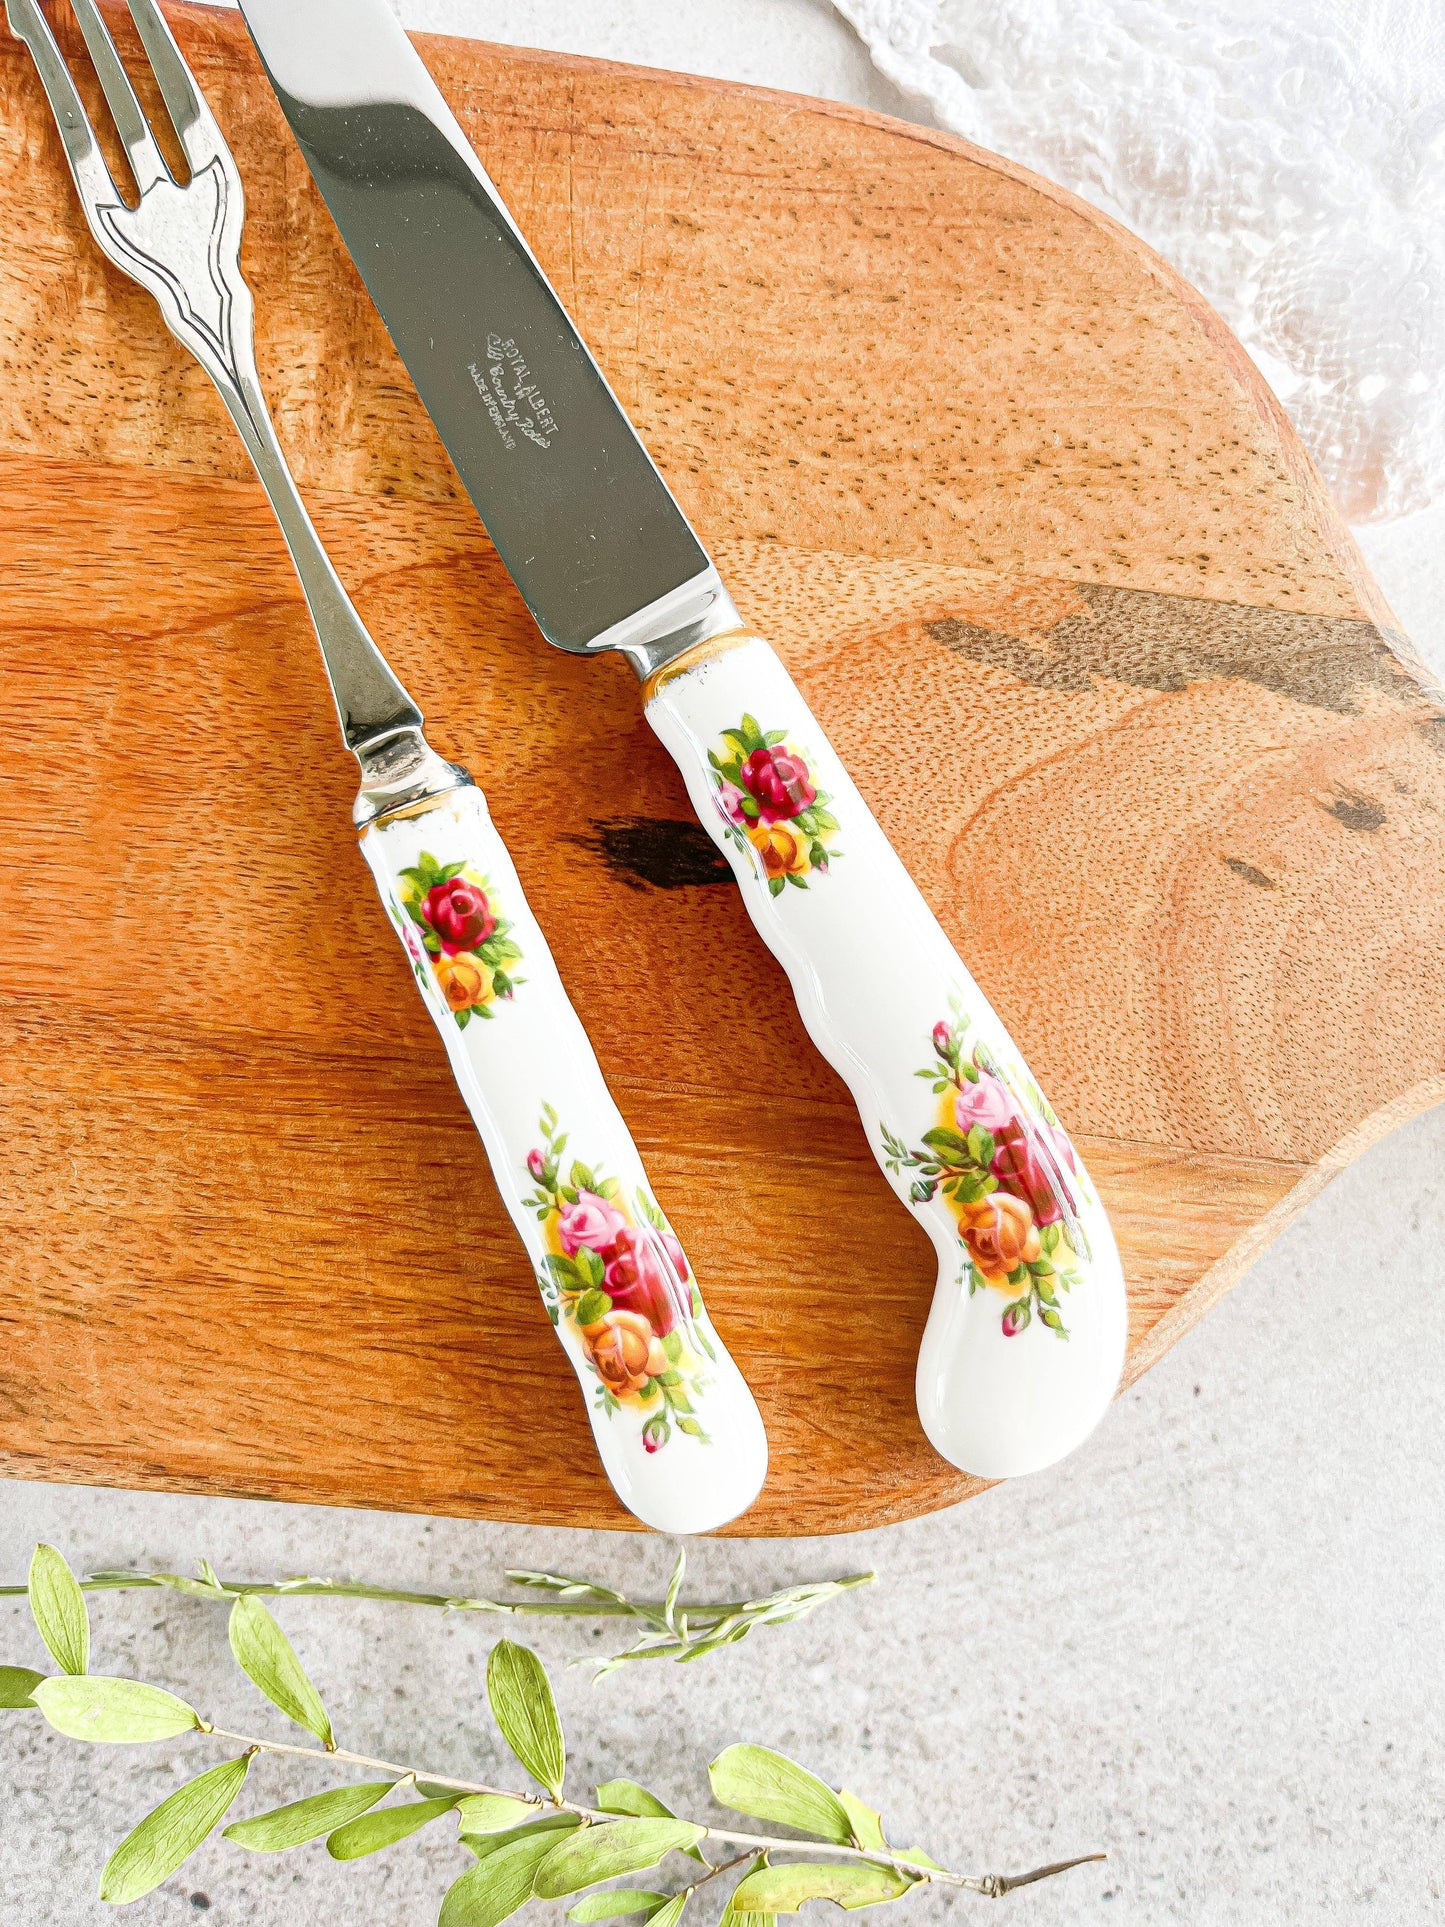 Royal Albert Cheese Knife & Pickle Fork Set - Old Country Roses - SOSC Home